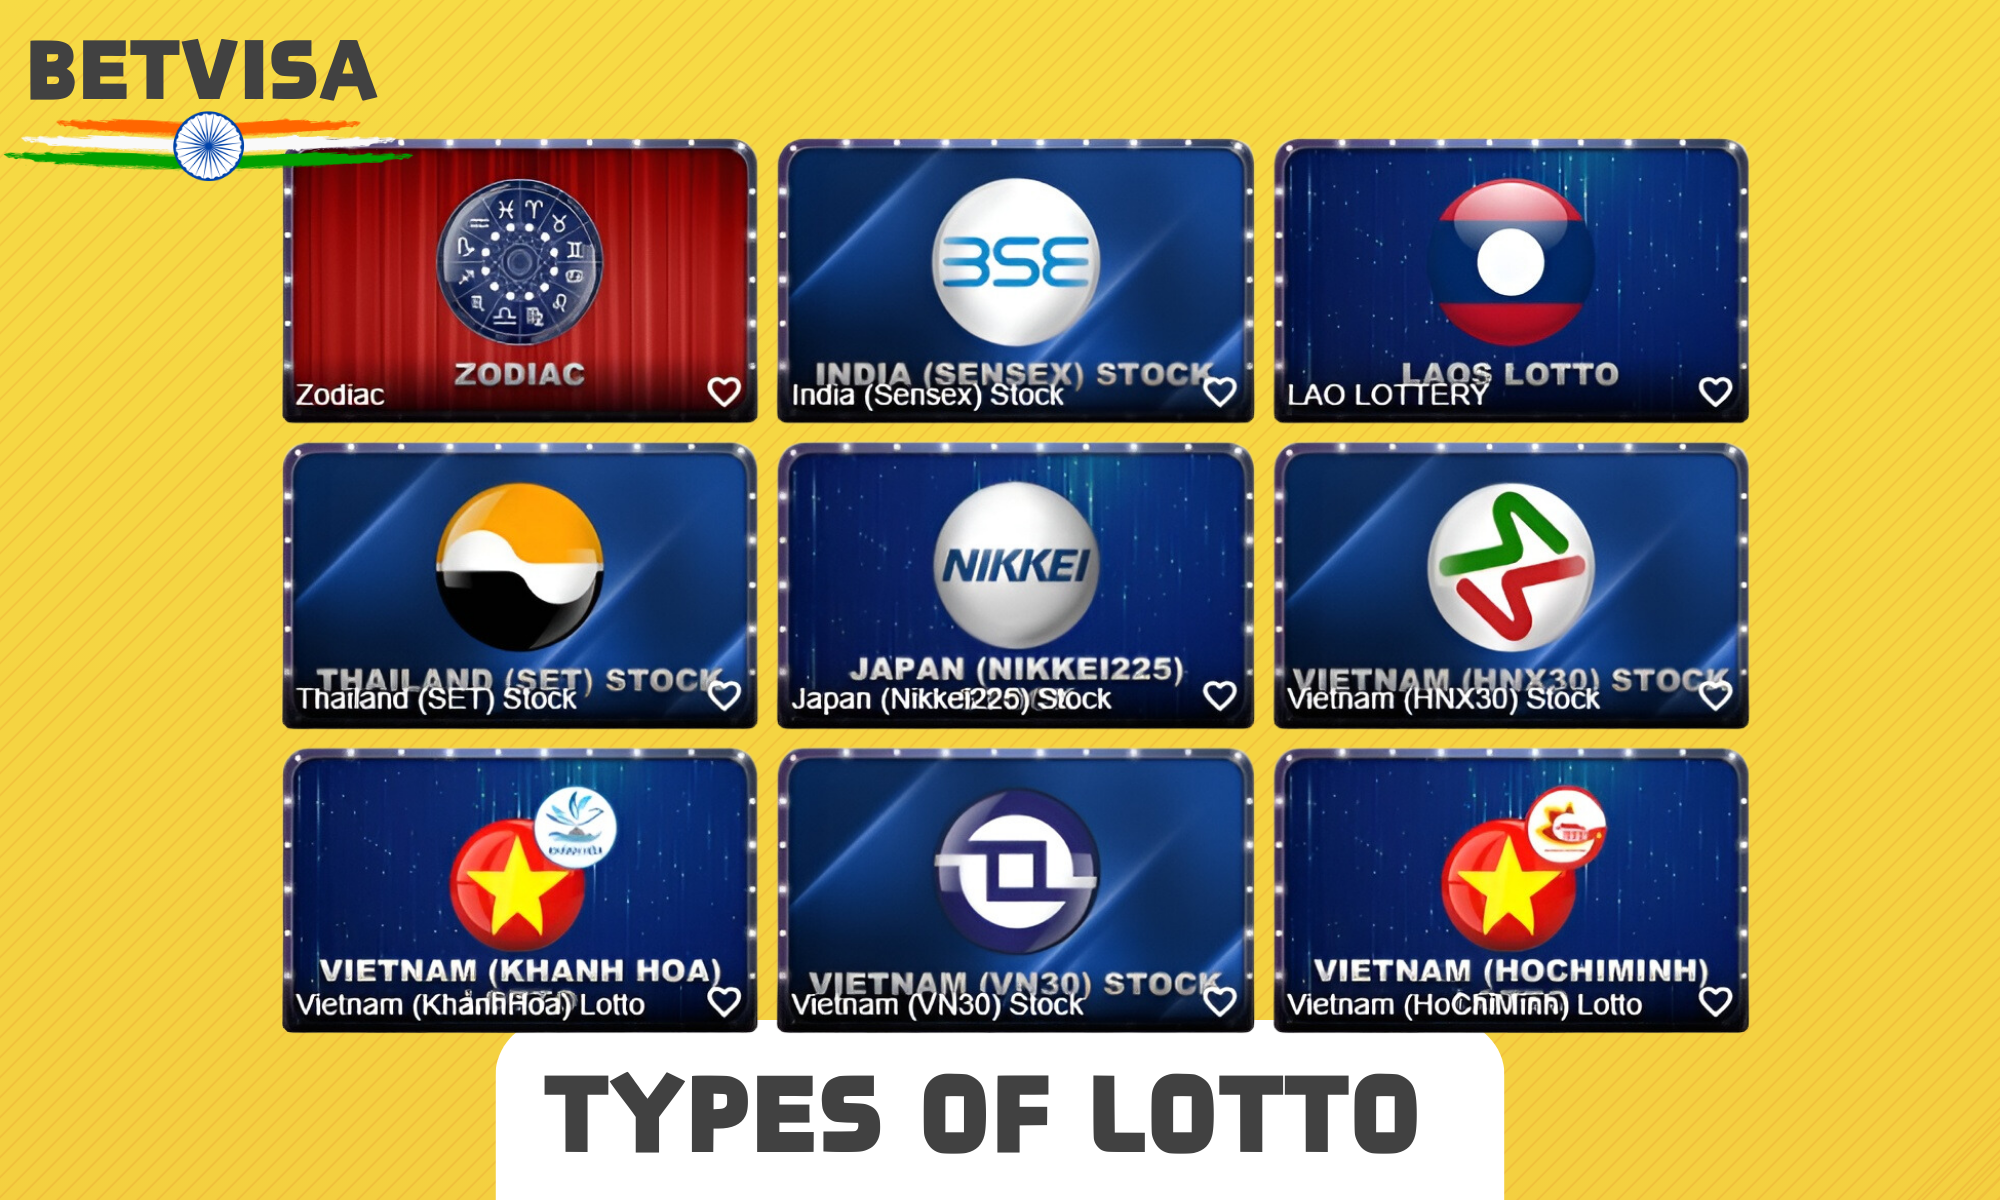 Betvisa offers many types of lotteries